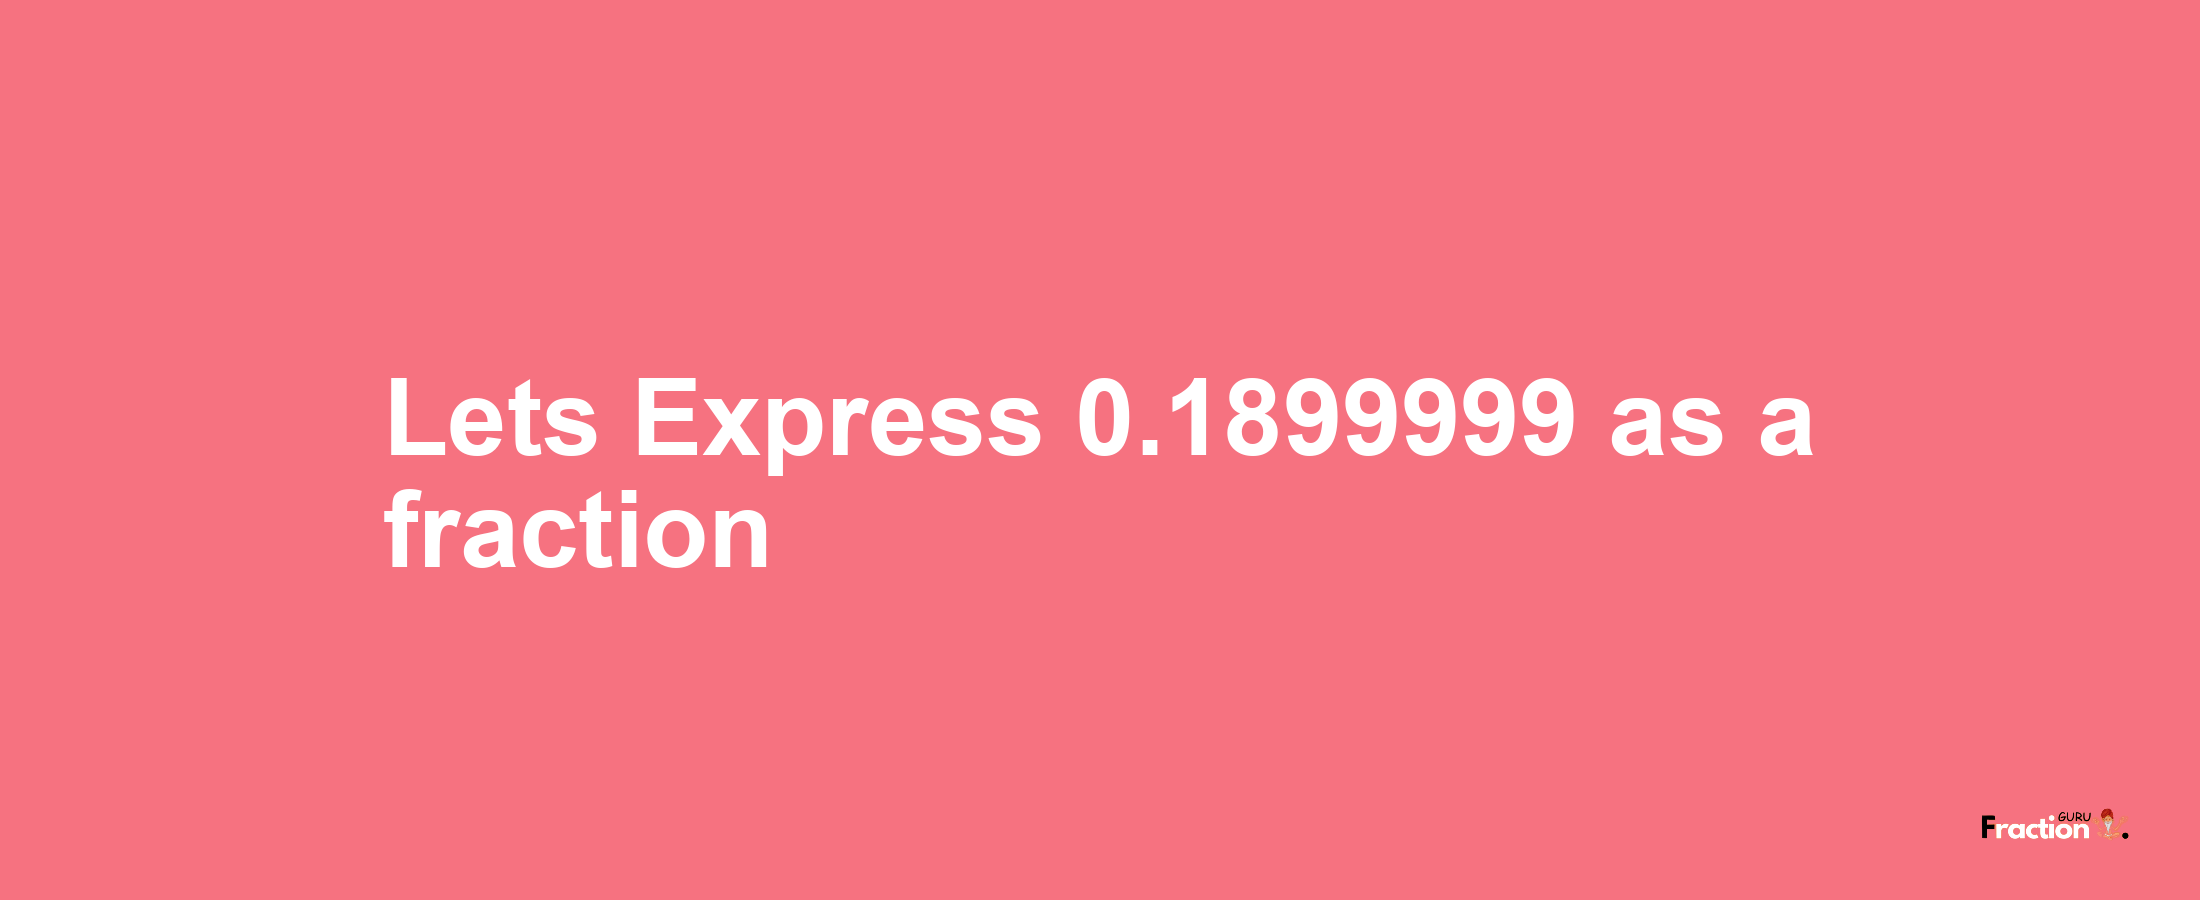 Lets Express 0.1899999 as afraction